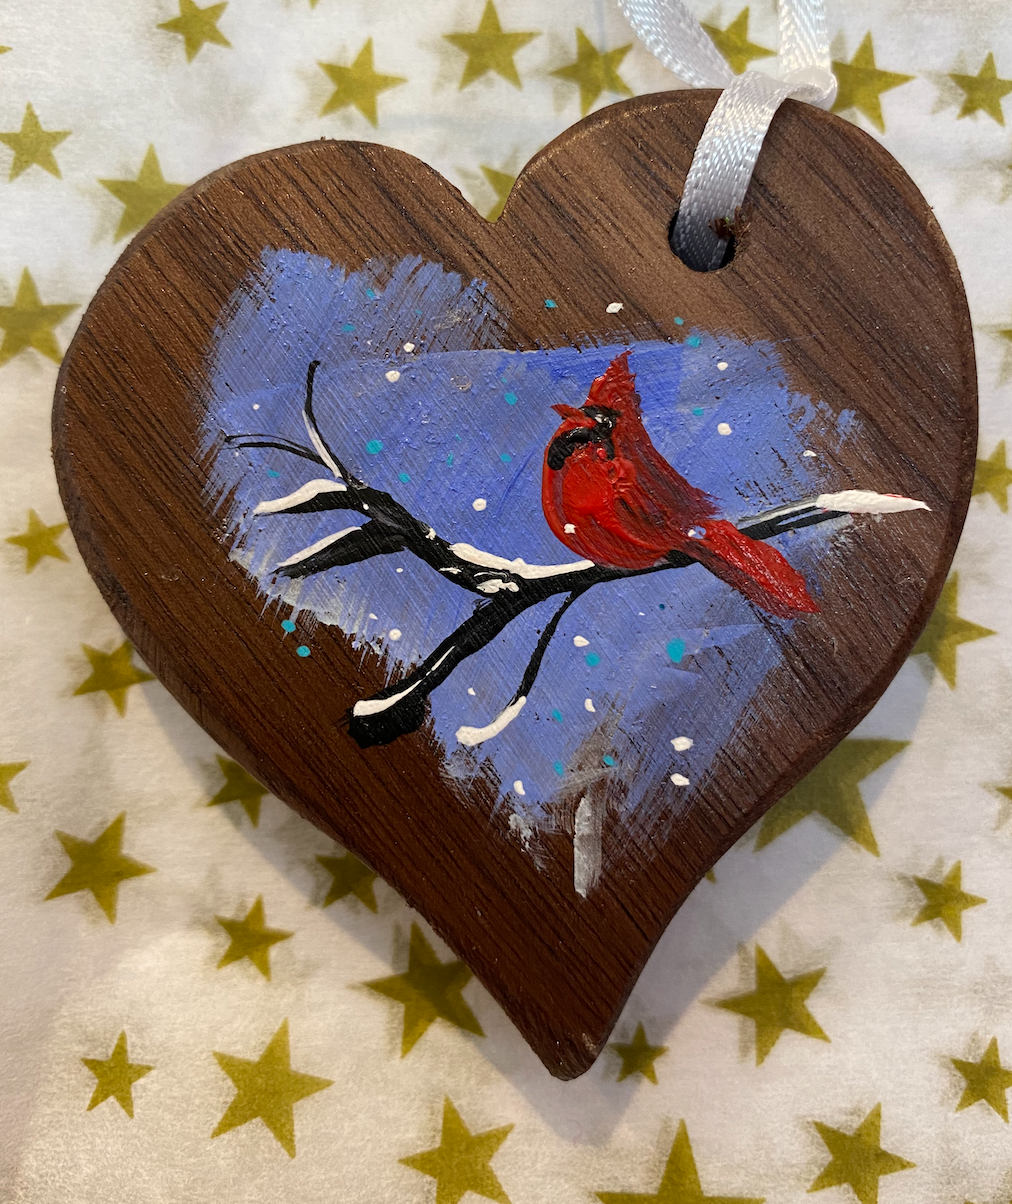 Hand Painted Black Walnut Heart Ornament - Cardinal in Snow #4